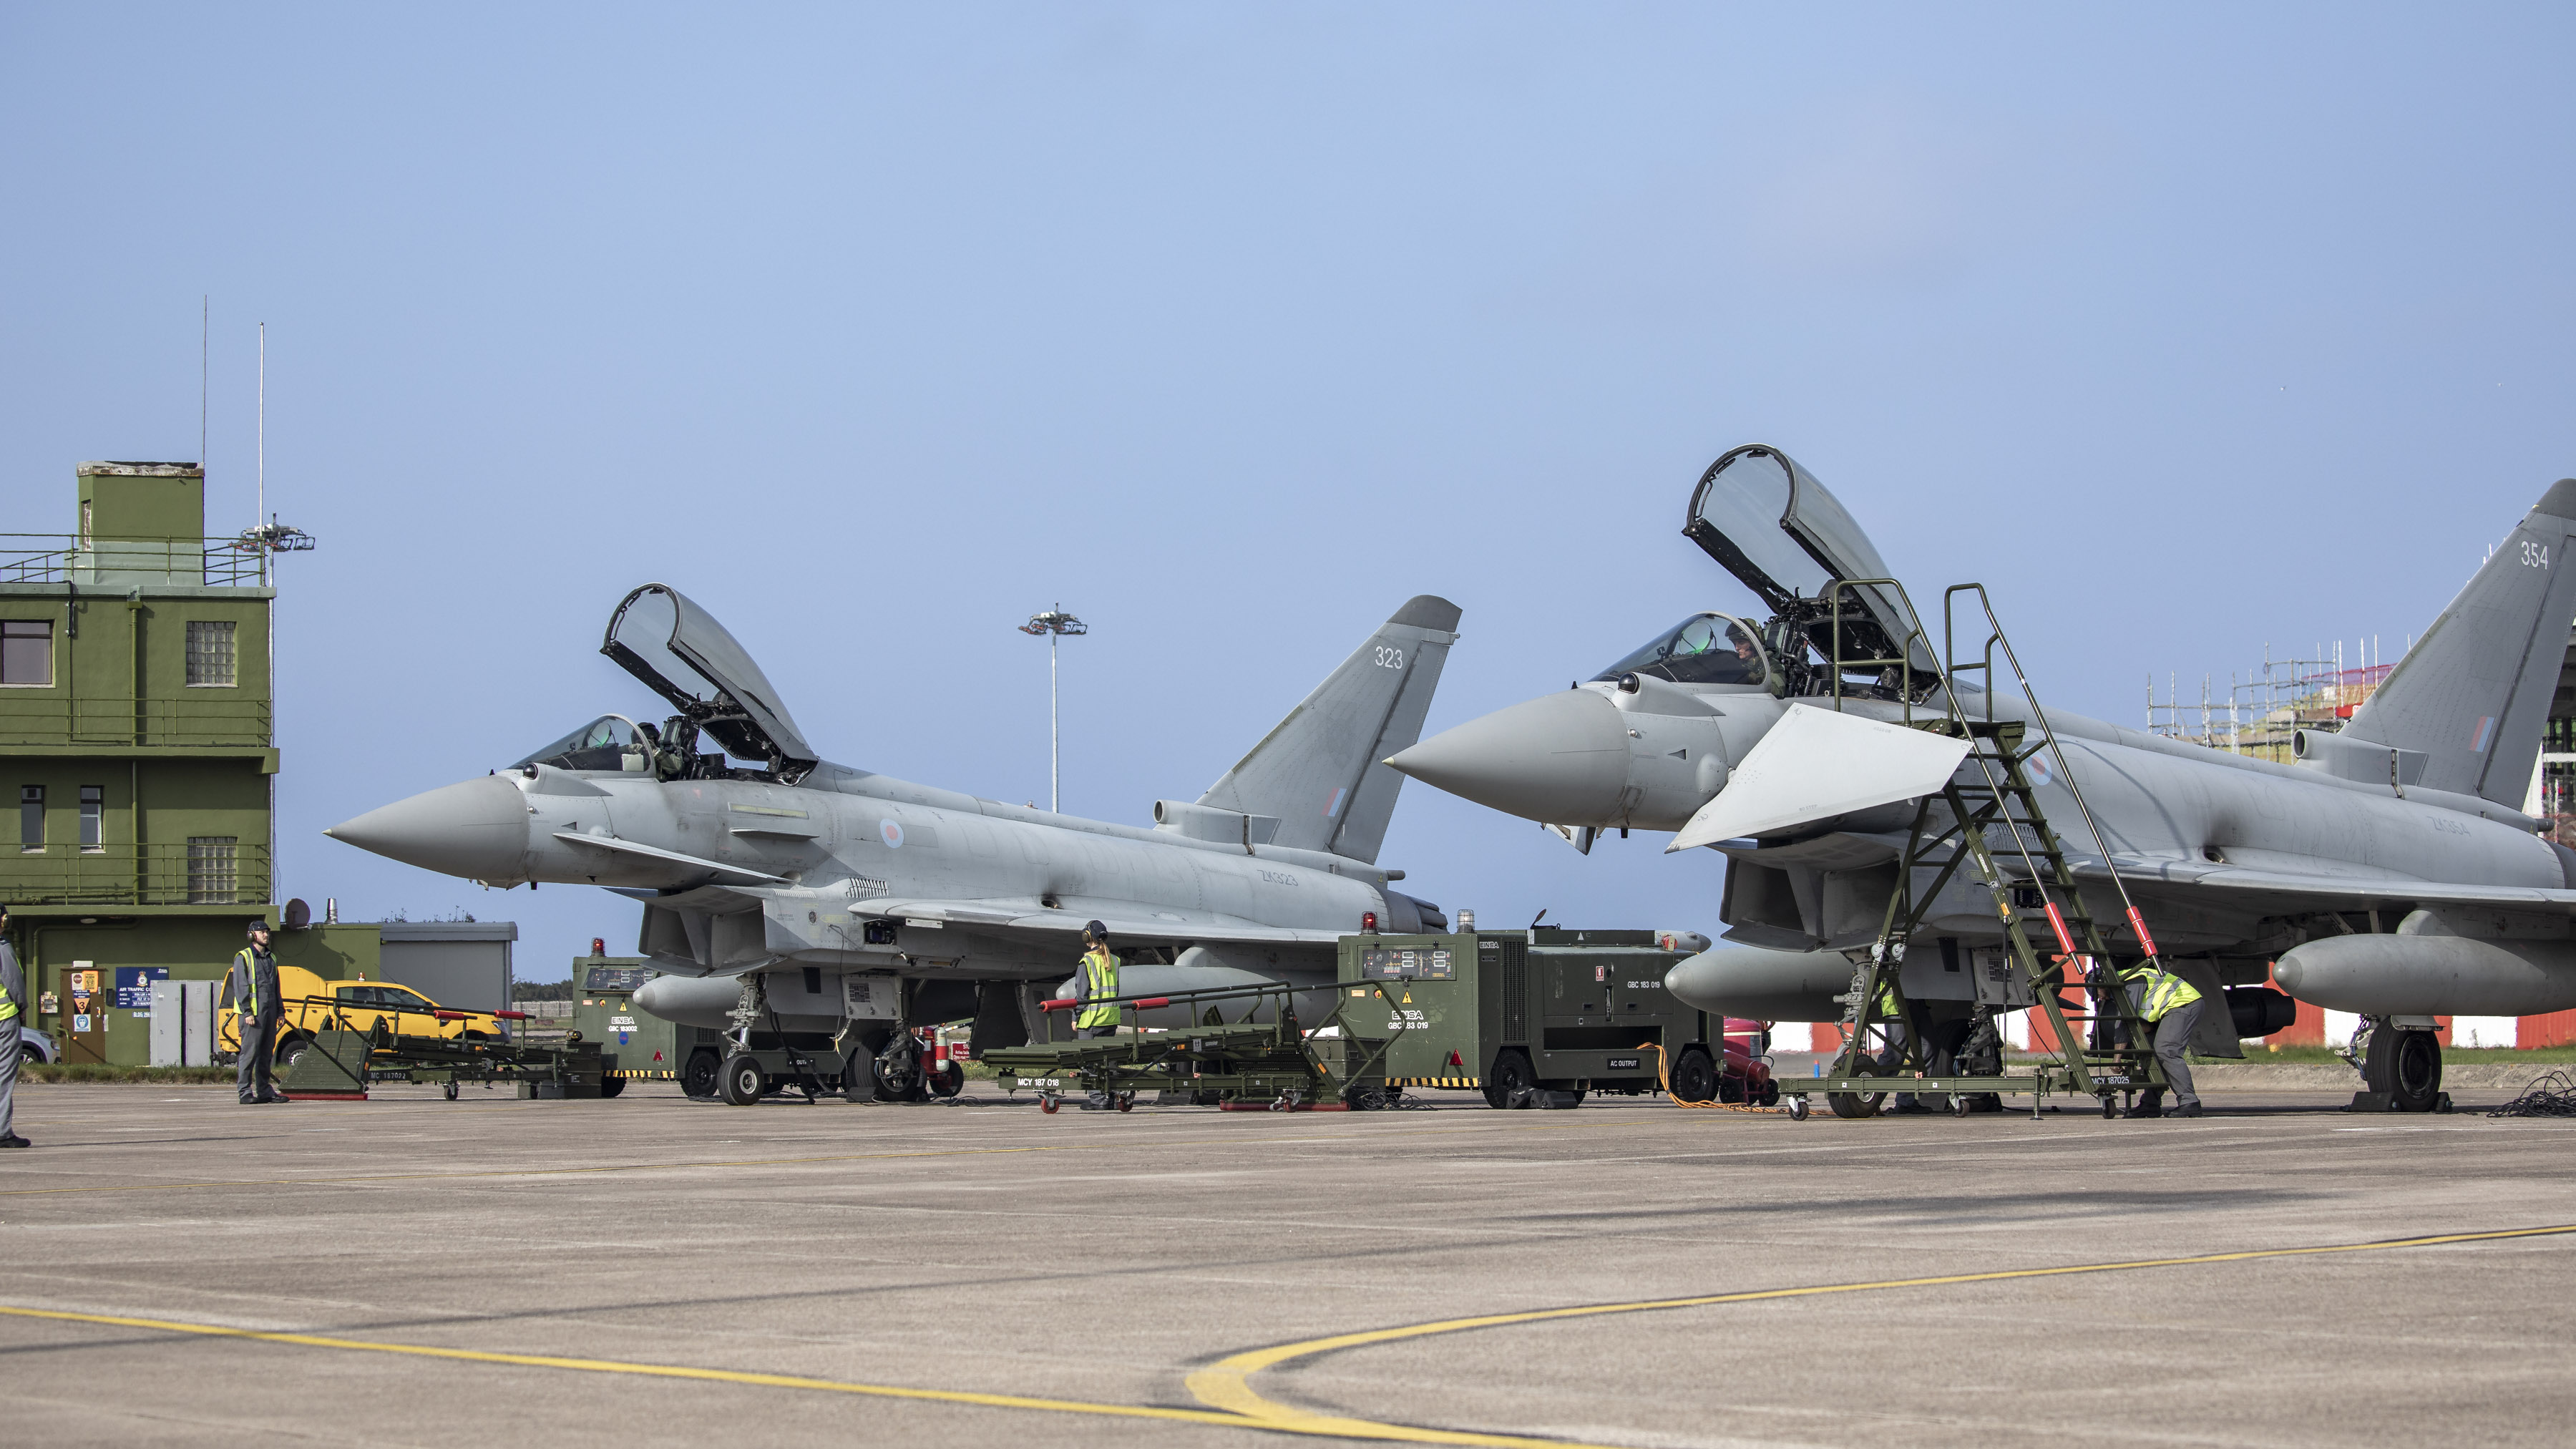 Two Typhoons on the airfield.